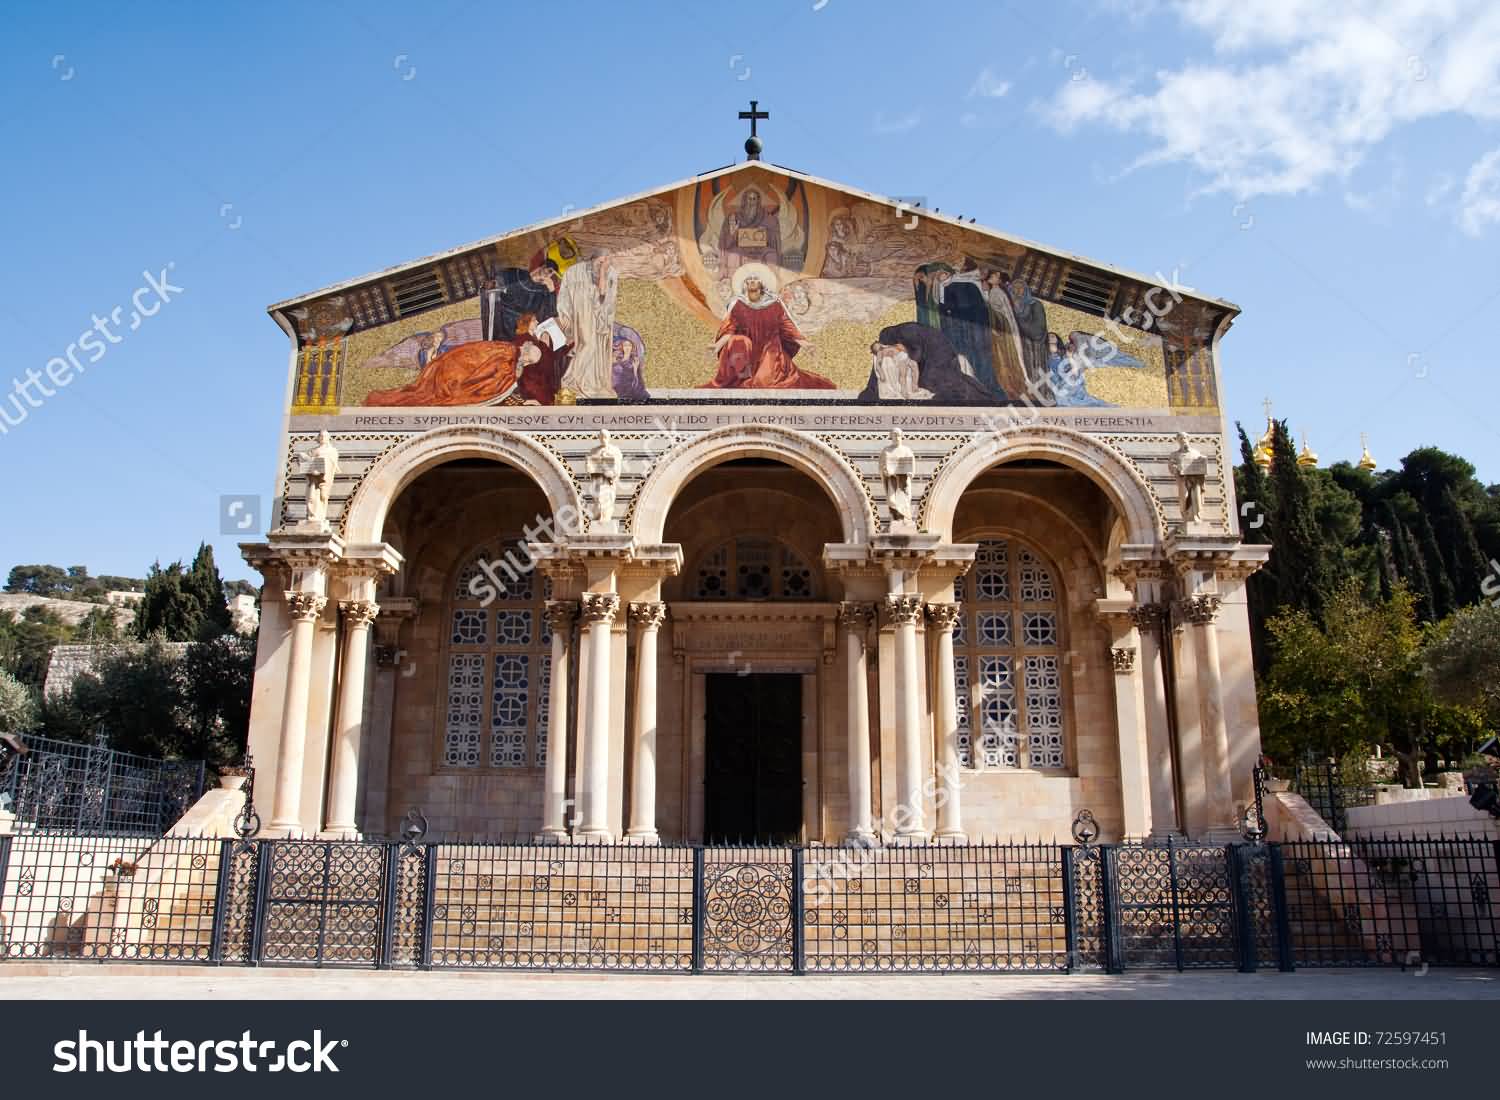 Church Of All Nations In Garden Of Gethsemane